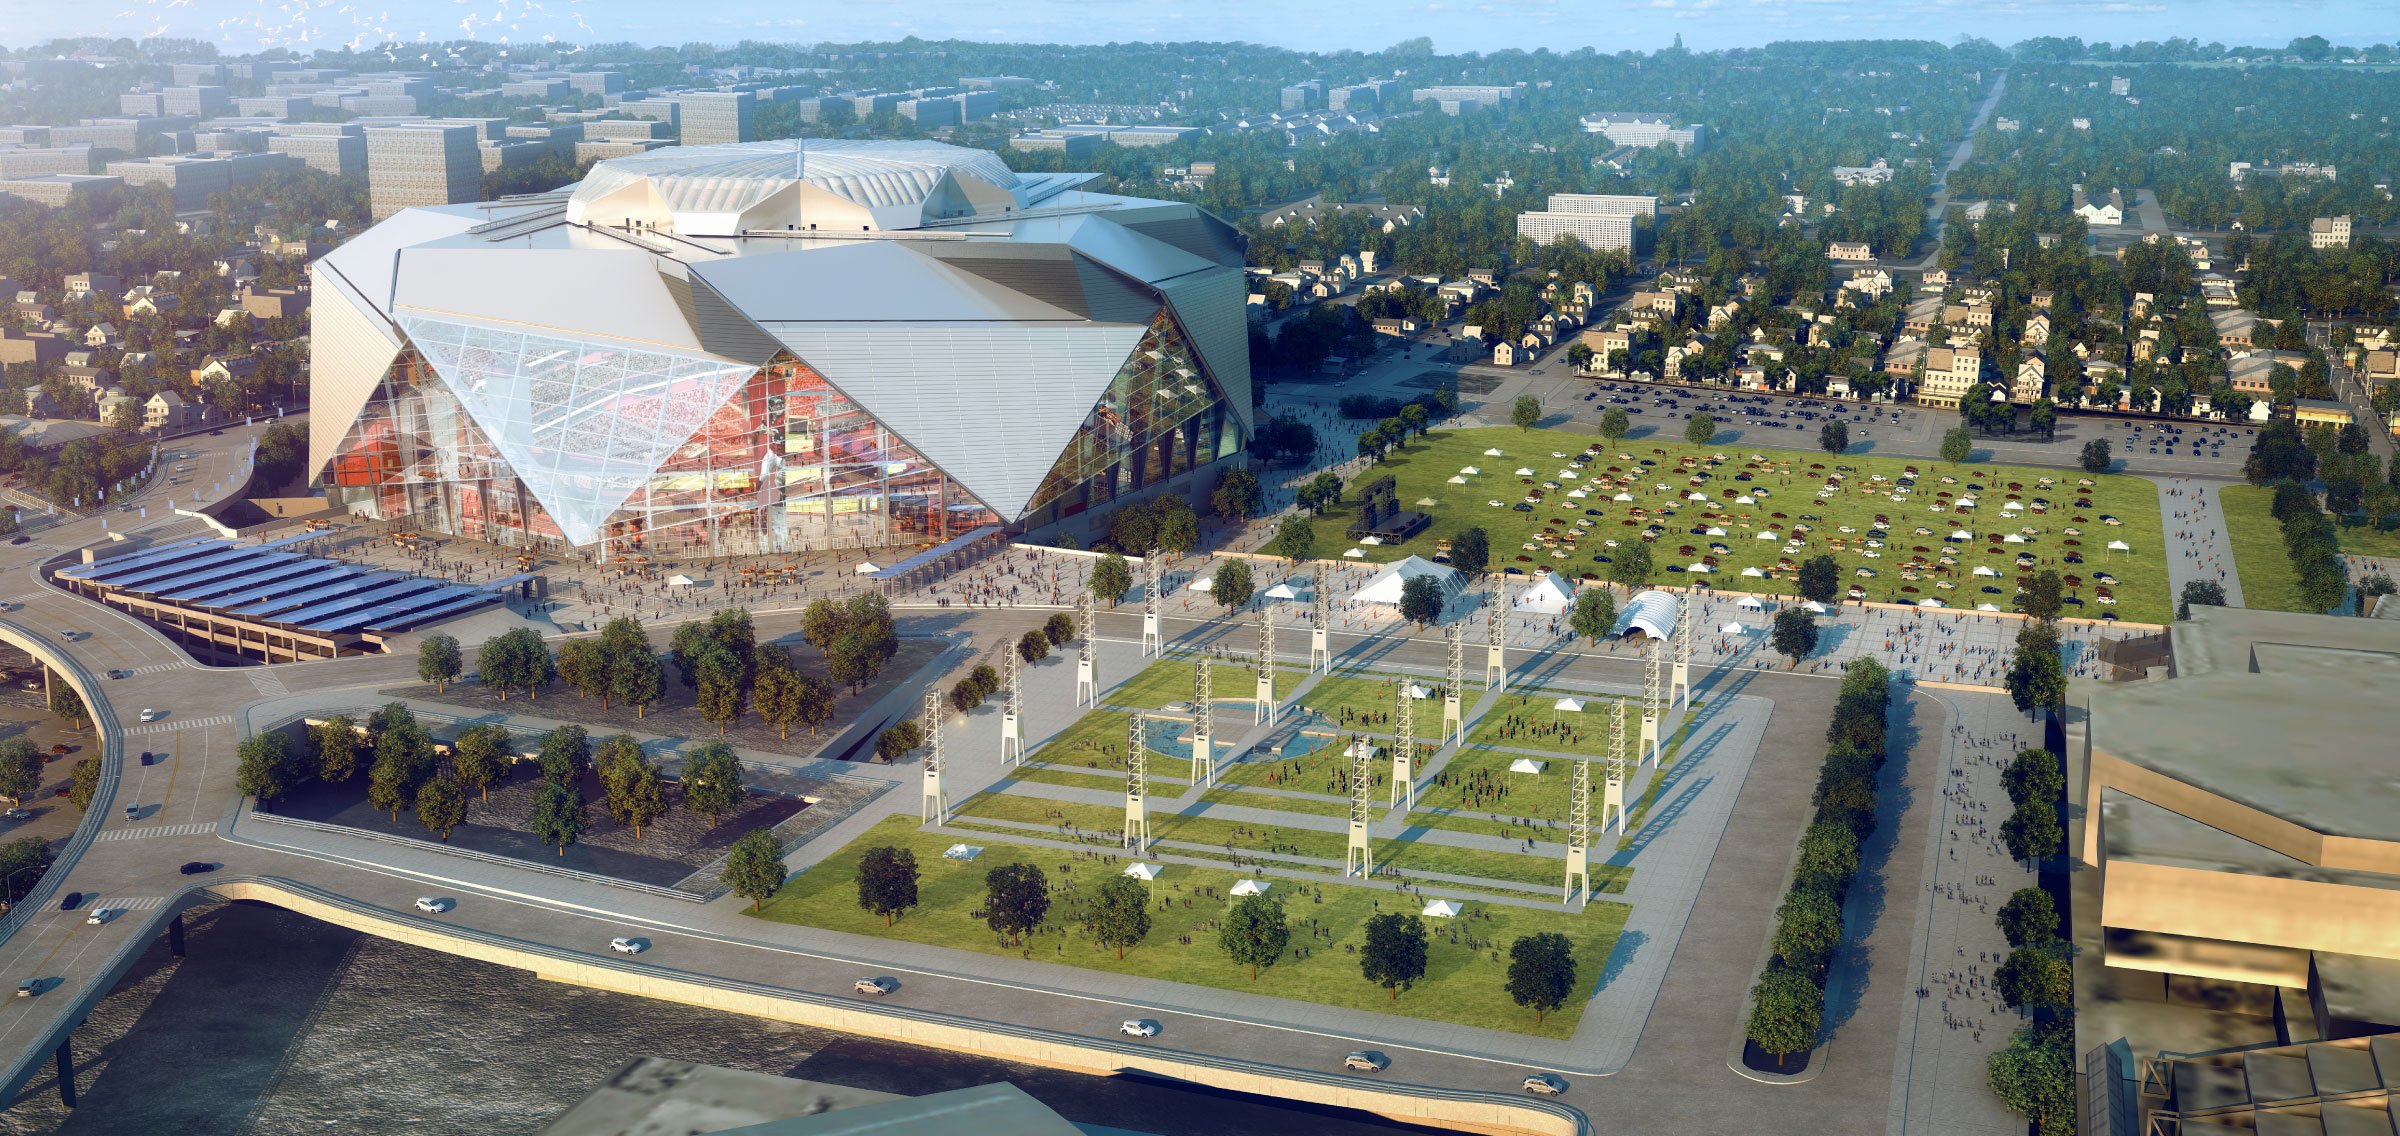 A new stadium in Atlanta, Georgia is pursuing several sustainability certifications.